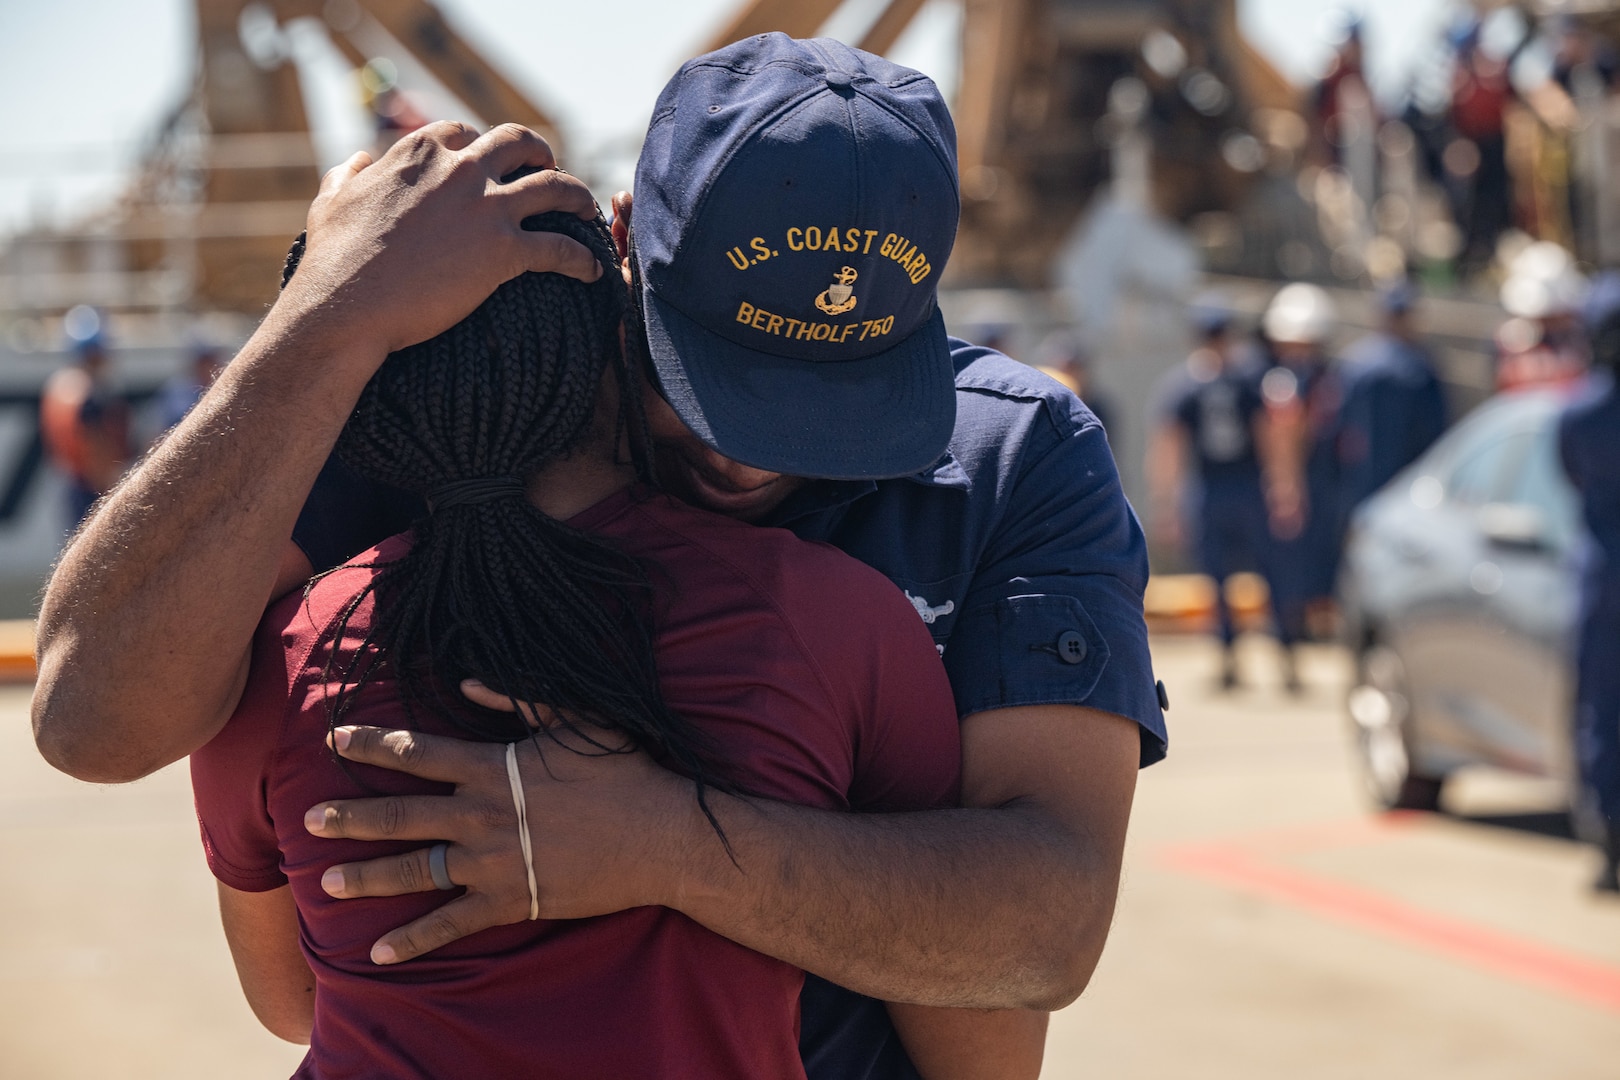 U.S. Coast Guard Chief Petty Officer Jerome Manuel, an Storekeeper assigned to the Coast Guard Cutter Bertholf (WMSL 750) greets his family at the cutter's return to home port on Coast Guard Base Alameda, Calif., following a 98-day patrol in the Indo-Pacific region, April 8, 2024. The crew returned following a 21,000-mile, 98-day Indo-Pacific deployment in support of U.S. Indo-Pacific Command and U.S. Navy's Seventh Fleet. (U.S. Coast Guard Photo by Petty Officer 3rd Class Hunter Schnabel)